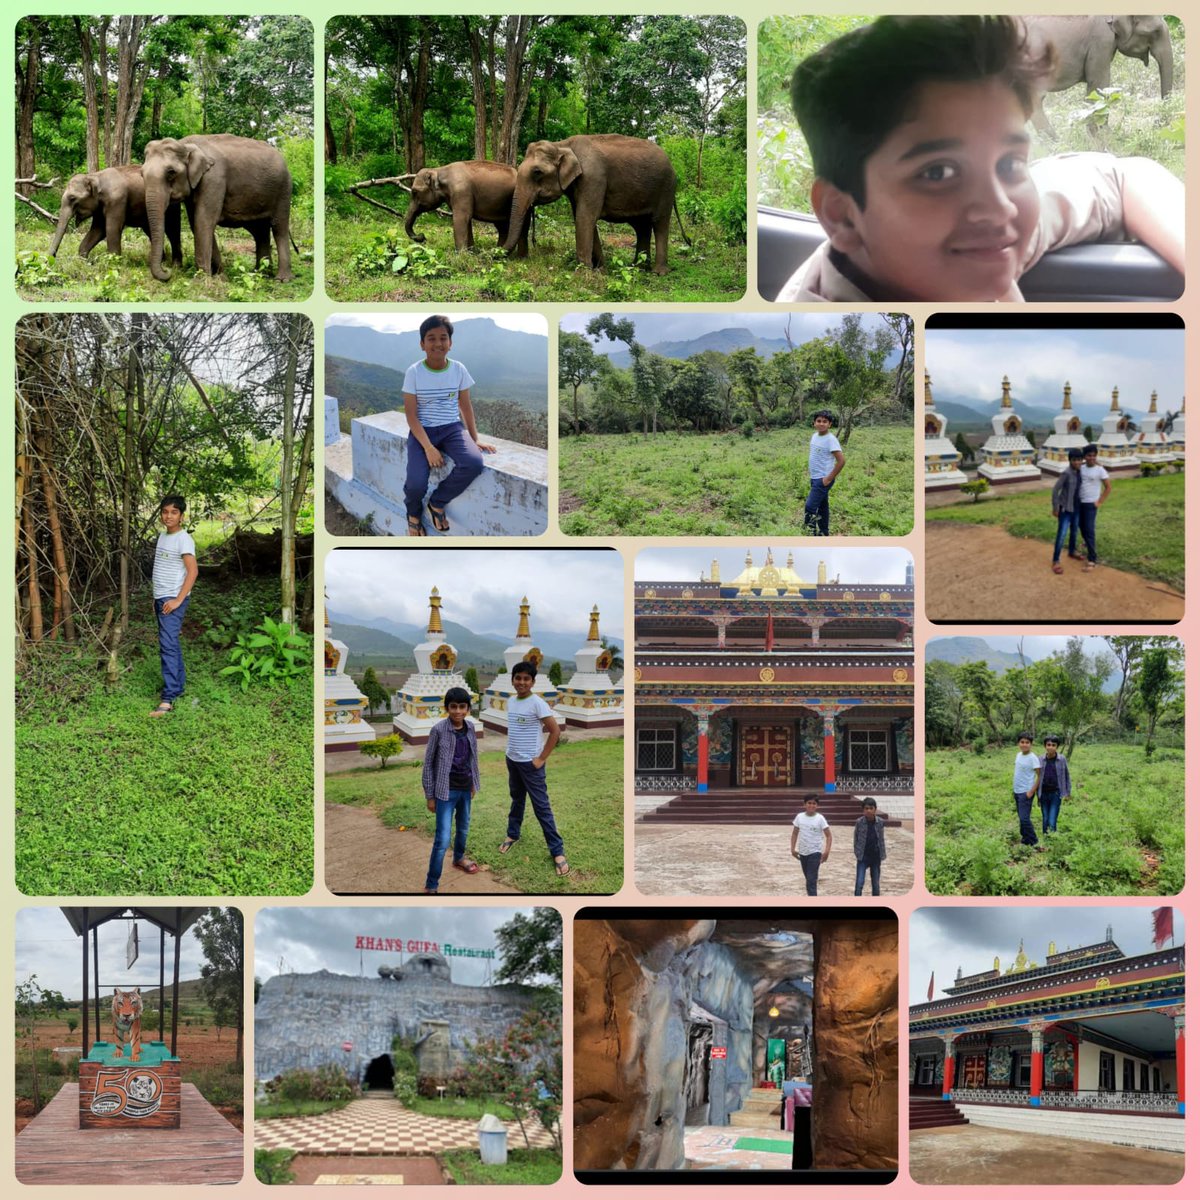 Our student, Aswanthvel of grade VII, visited Sathyamangalam Tiger Reserve during the summer holidays and shared his wonderful experience with us.
#srinachammalvidyavani #Tigers #forestlive #memories #holidays #travelphotography #summer